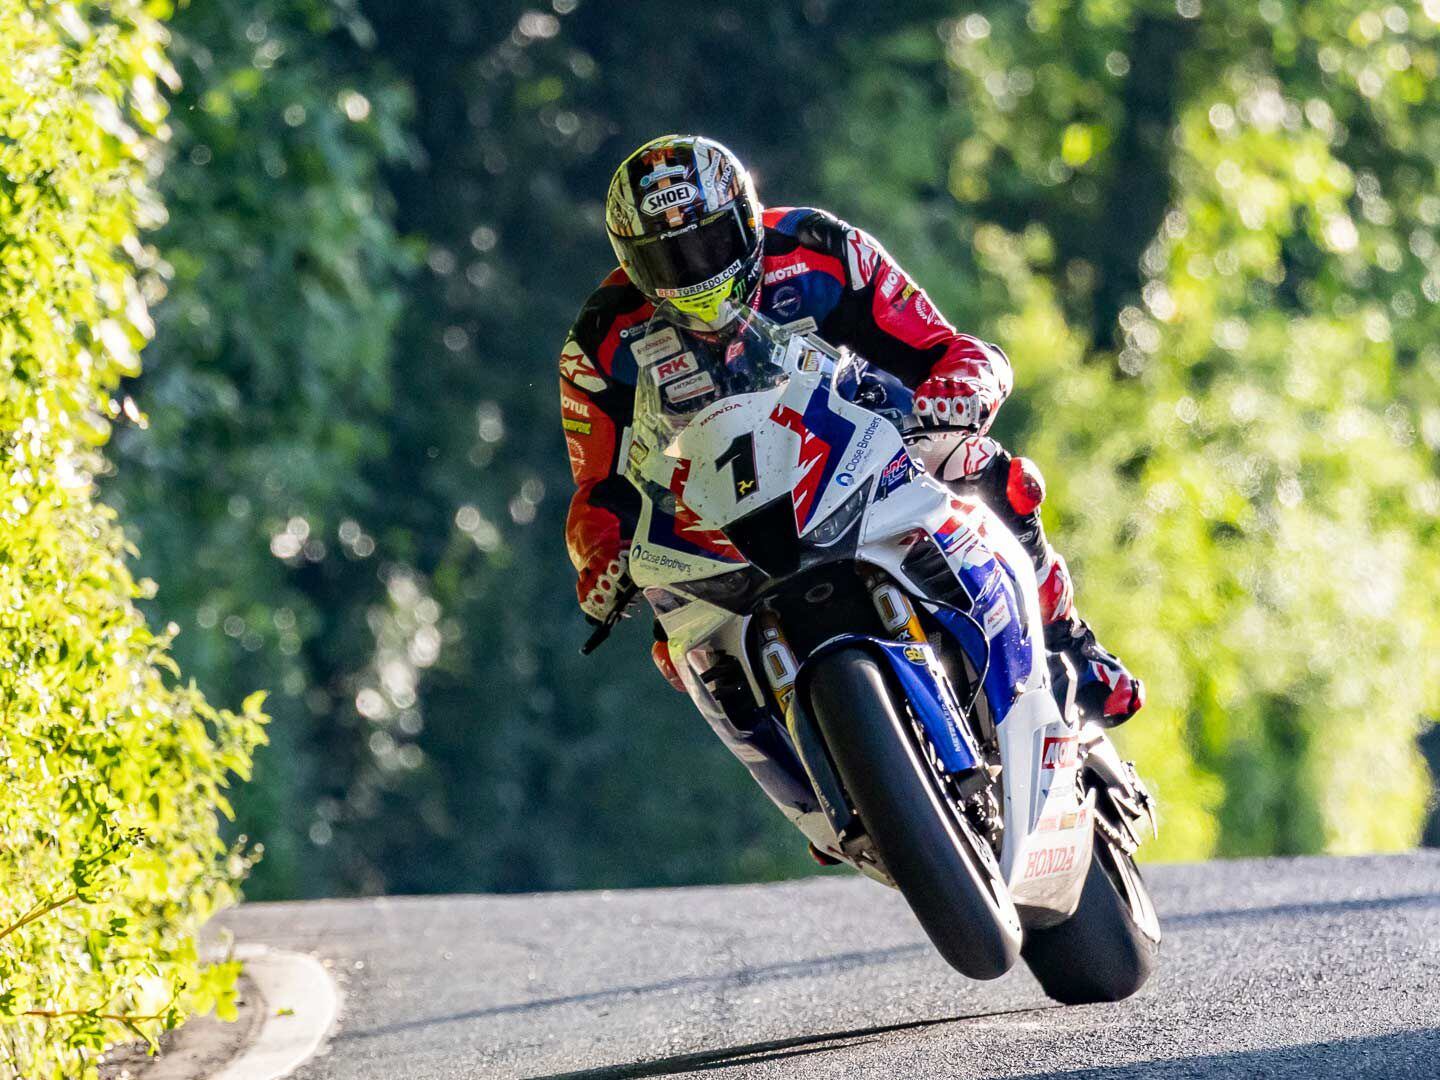 John McGuinness, the winningest active TT rider with 23 TT victories, will start his 100th TT on Saturday. McGuinness was the first rider in TT history to exceed 130 mph and, despite turning 50 this year, has not slowed down, clocking over 129 mph on his Honda Racing Fireblade RR-R.